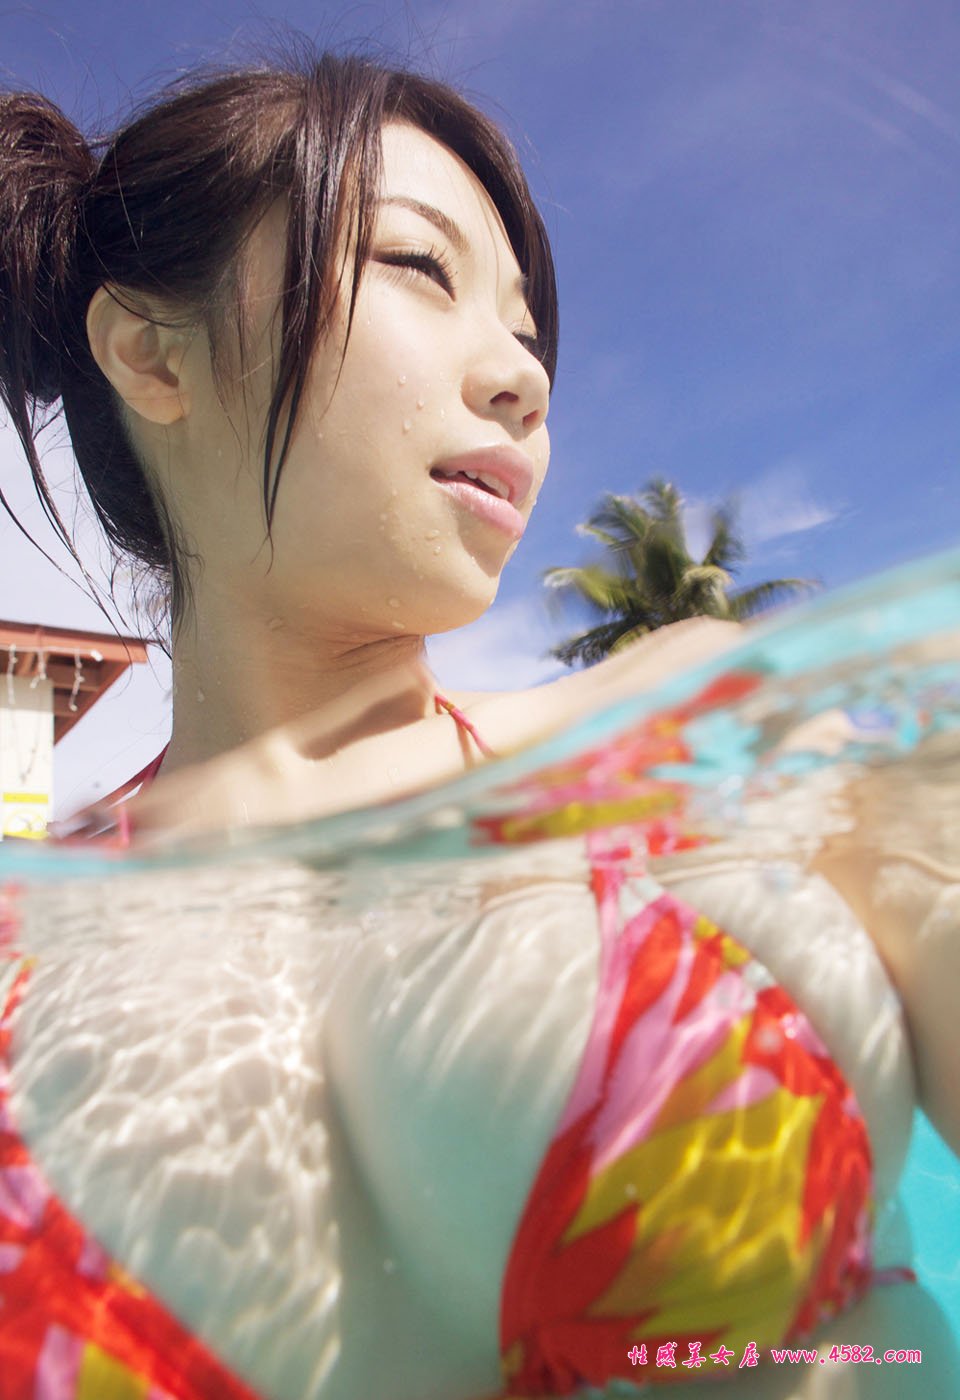 Pretty Chinese lady in swimming pool with XL big size